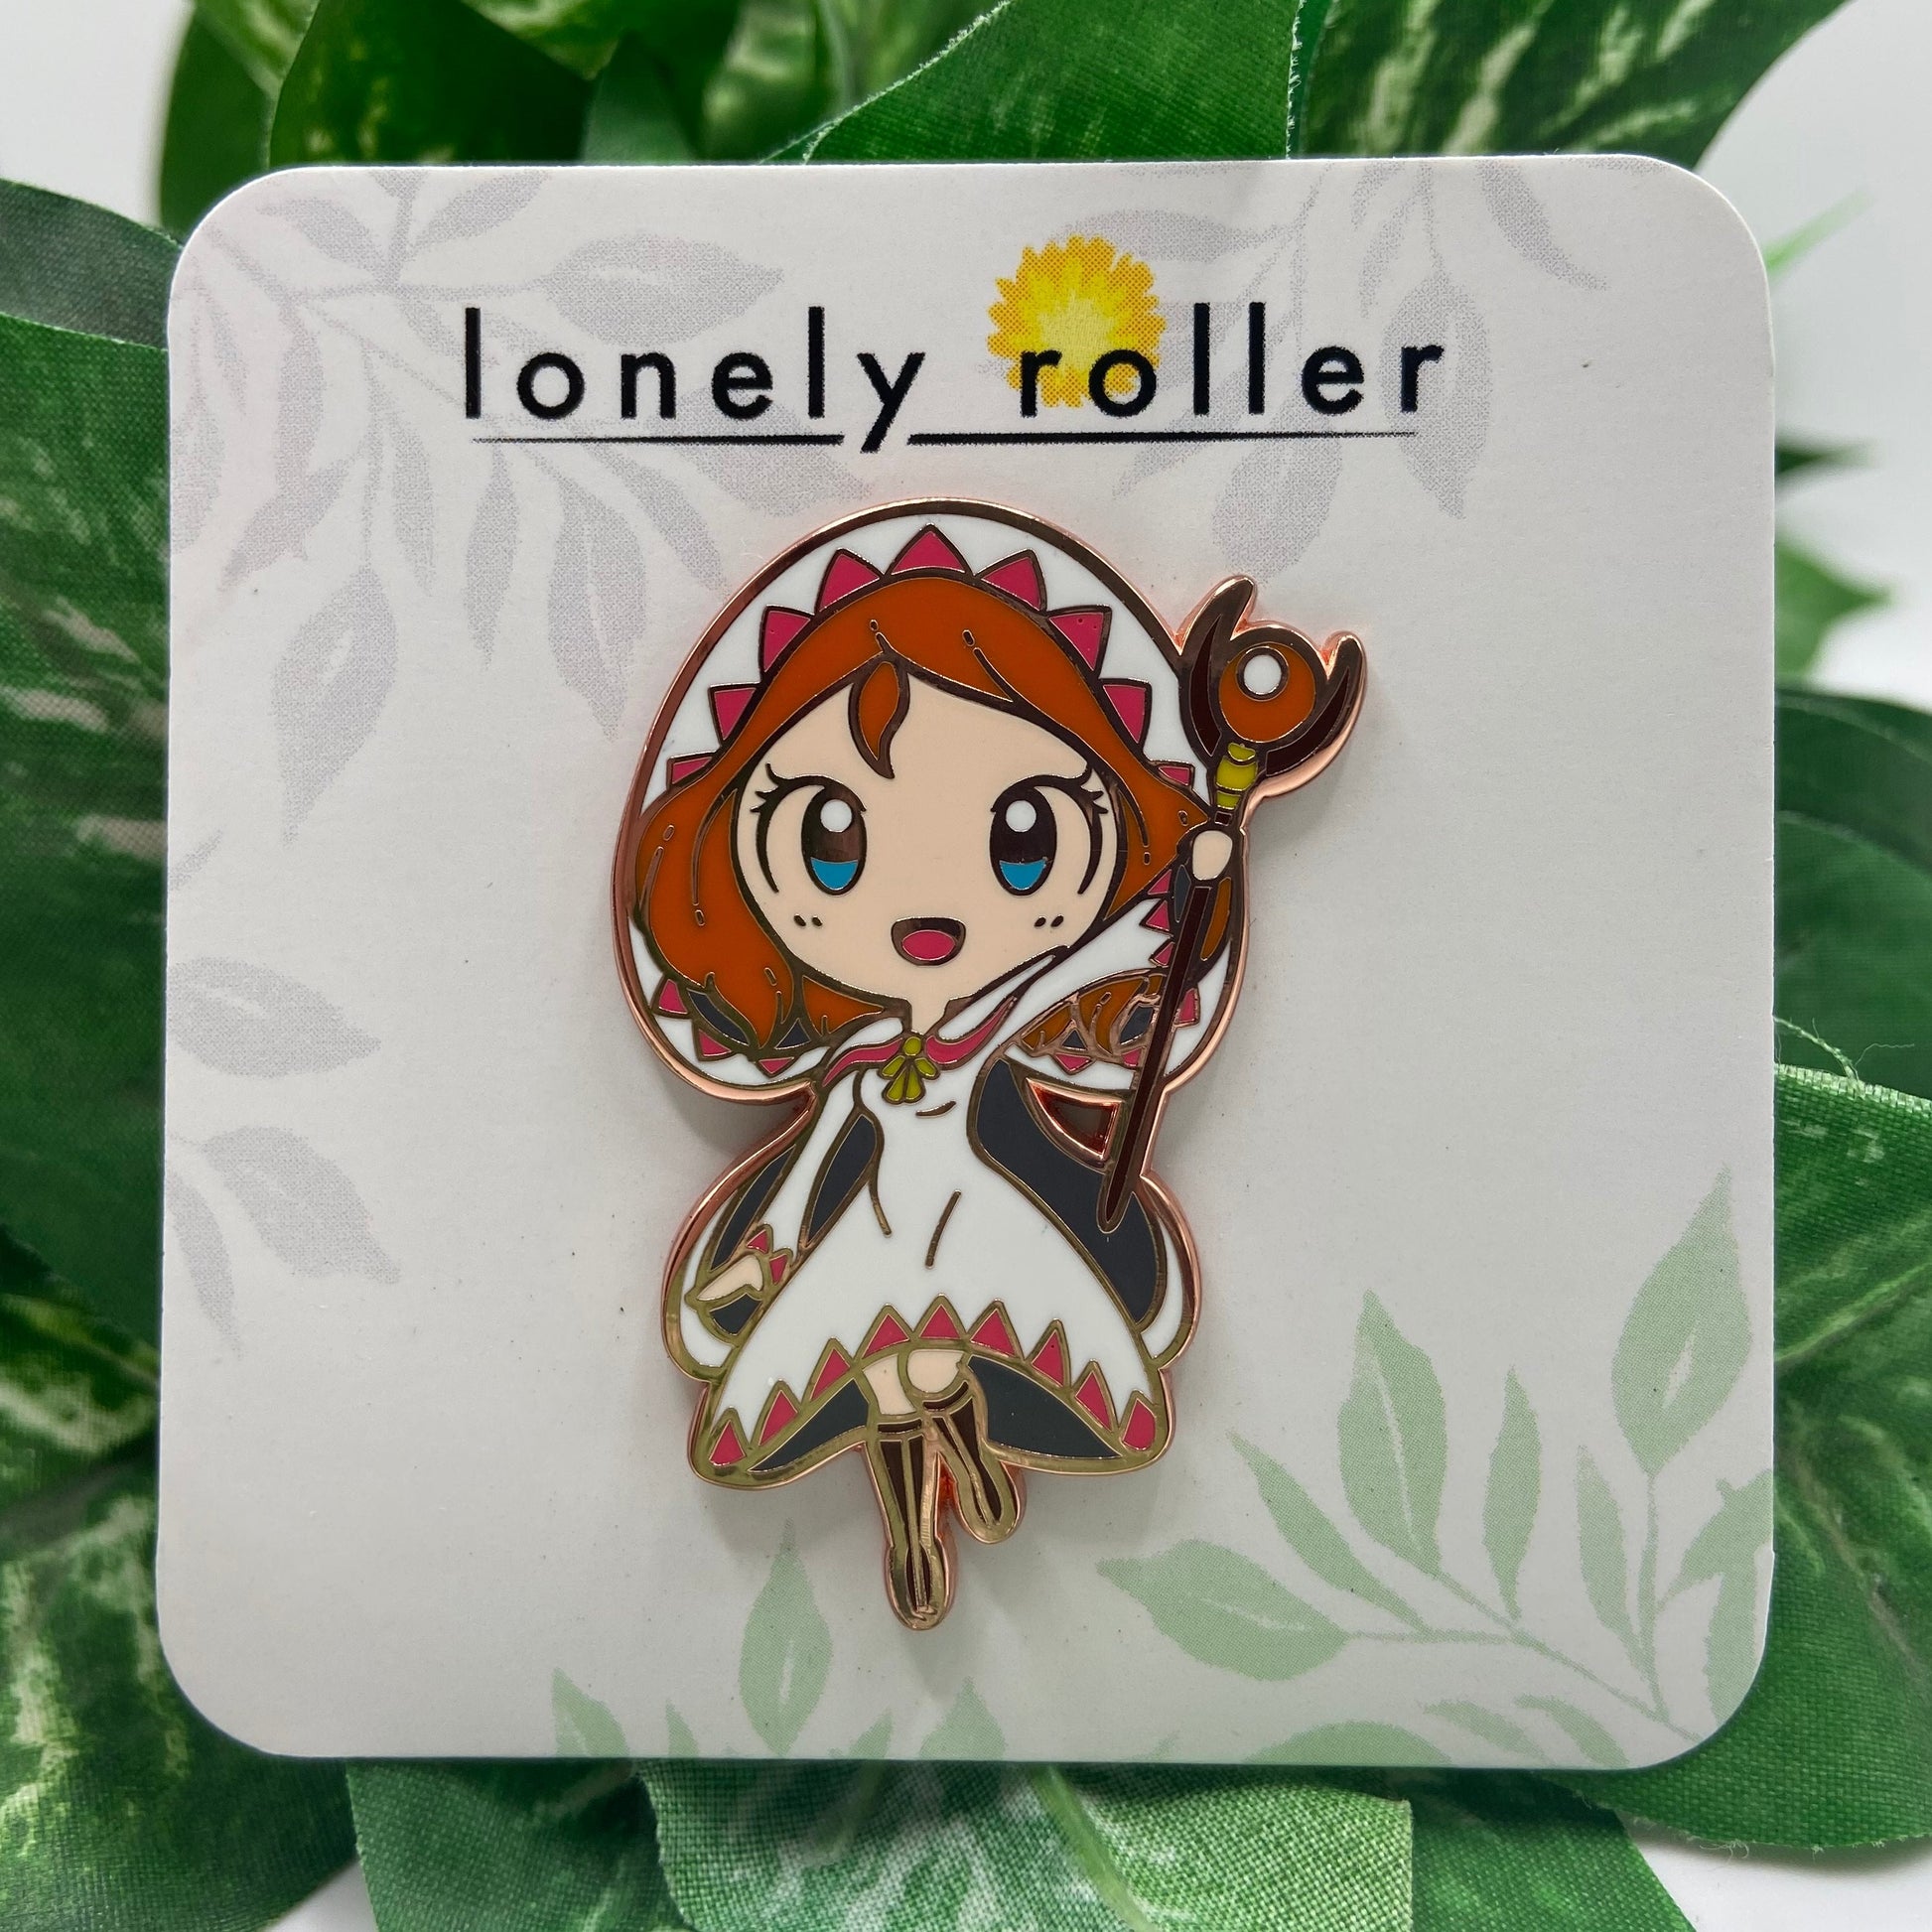 Hard Enamel Pin on Backing Card with "lonely roller" text